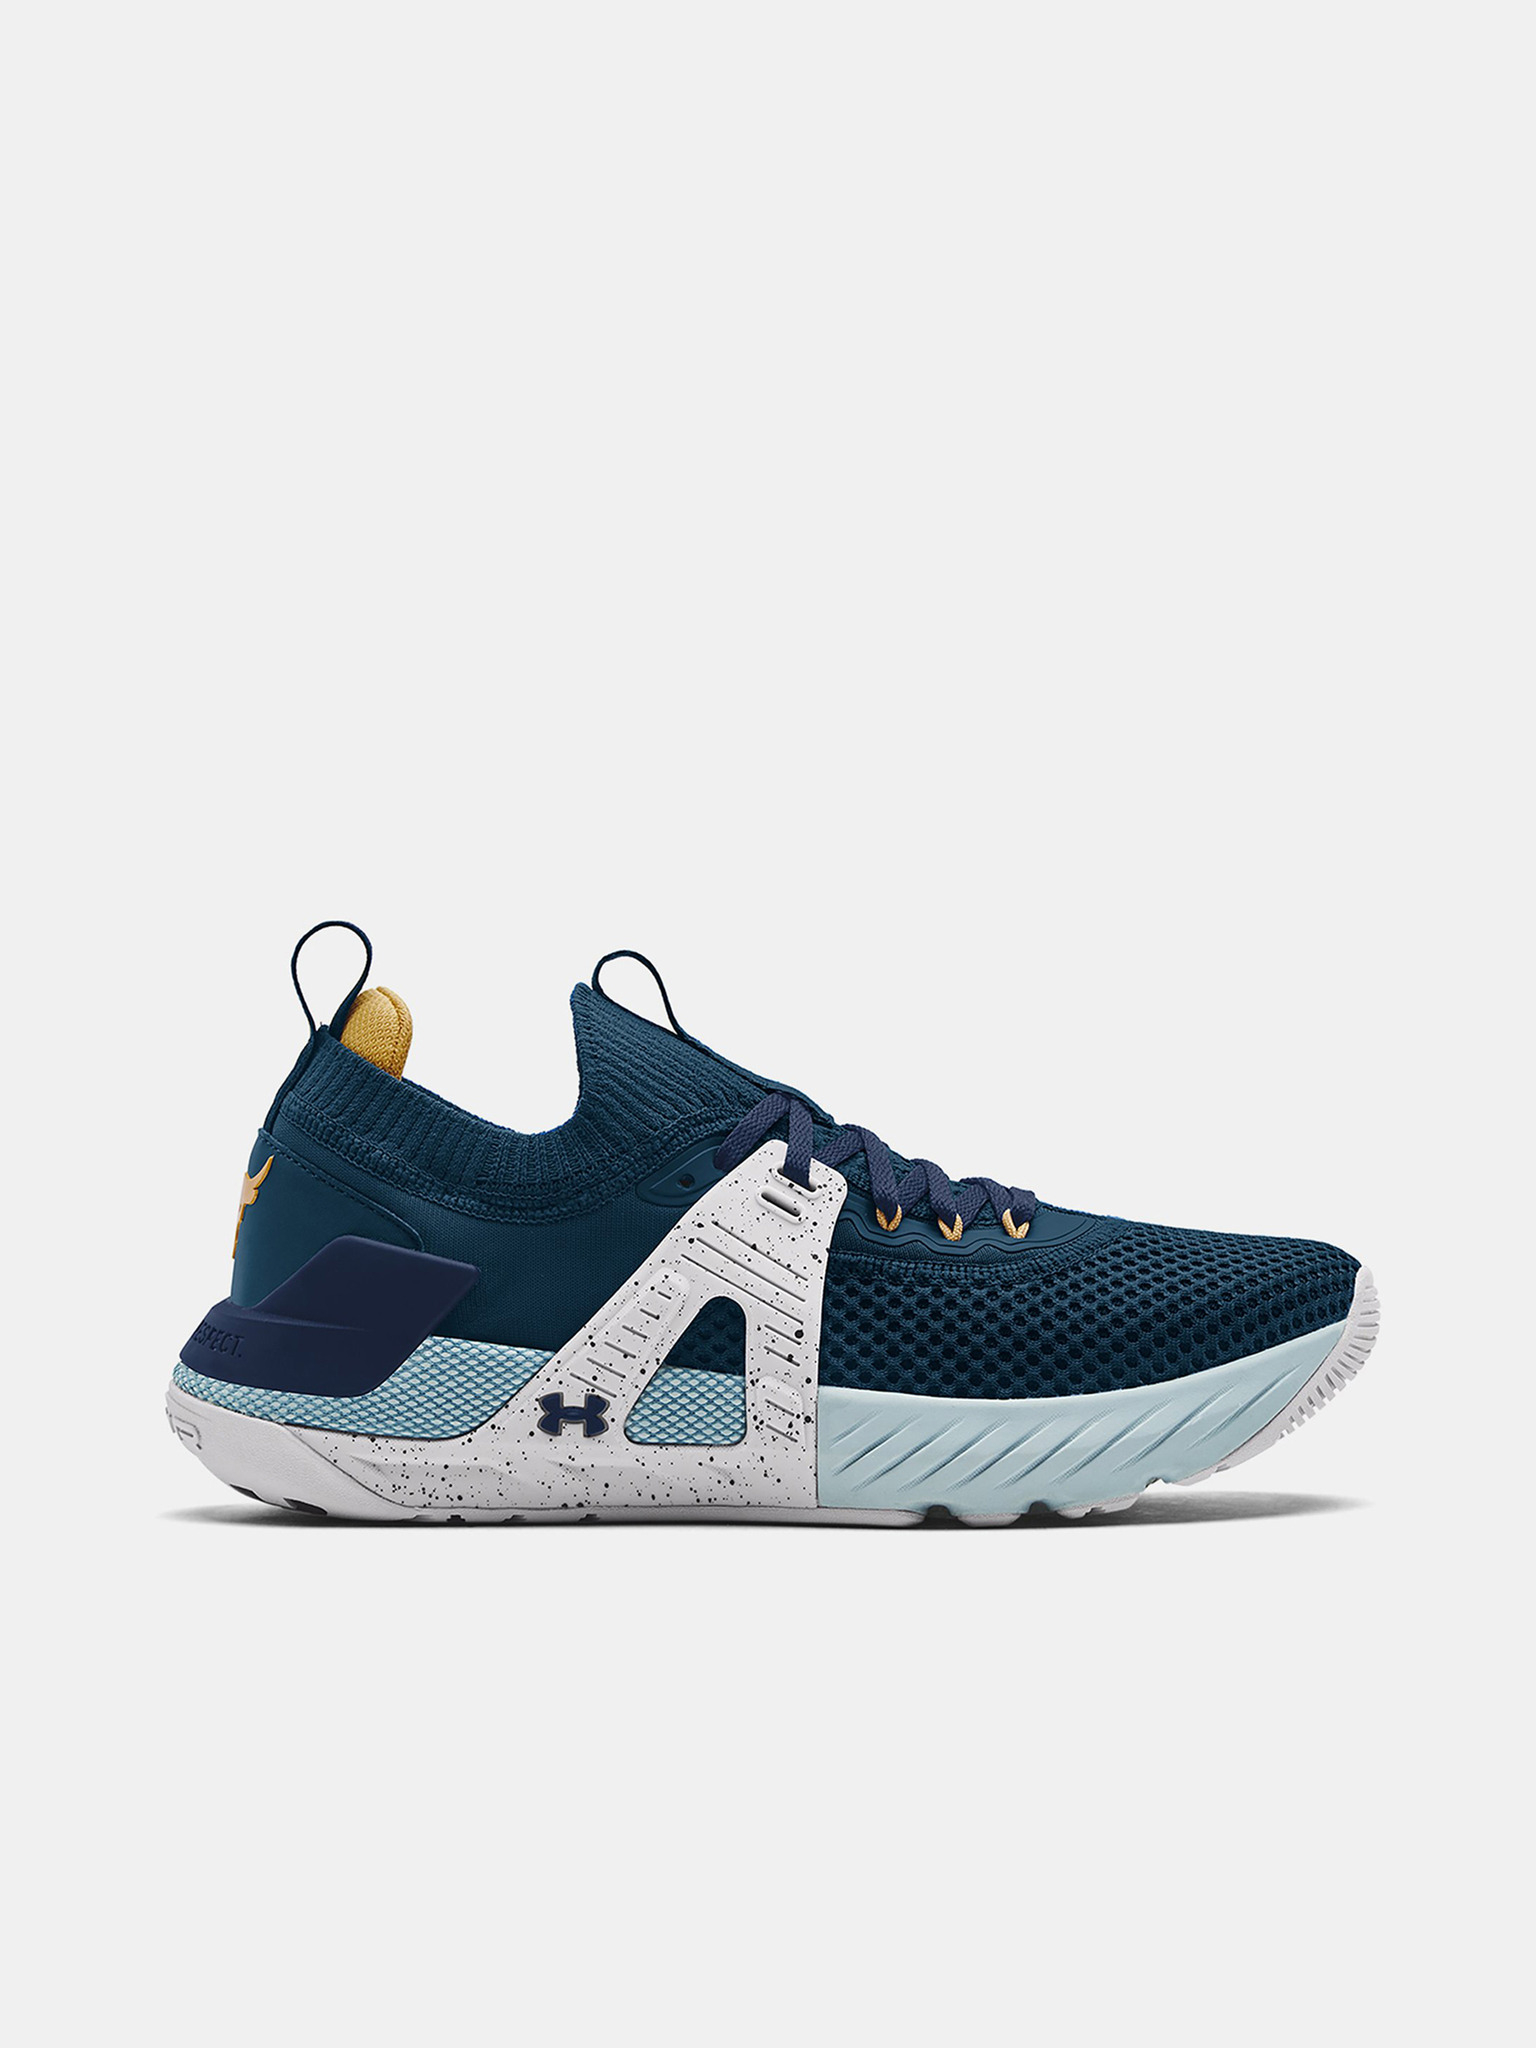 Under Armour Women's Project Rock BSR 4 Training Shoes